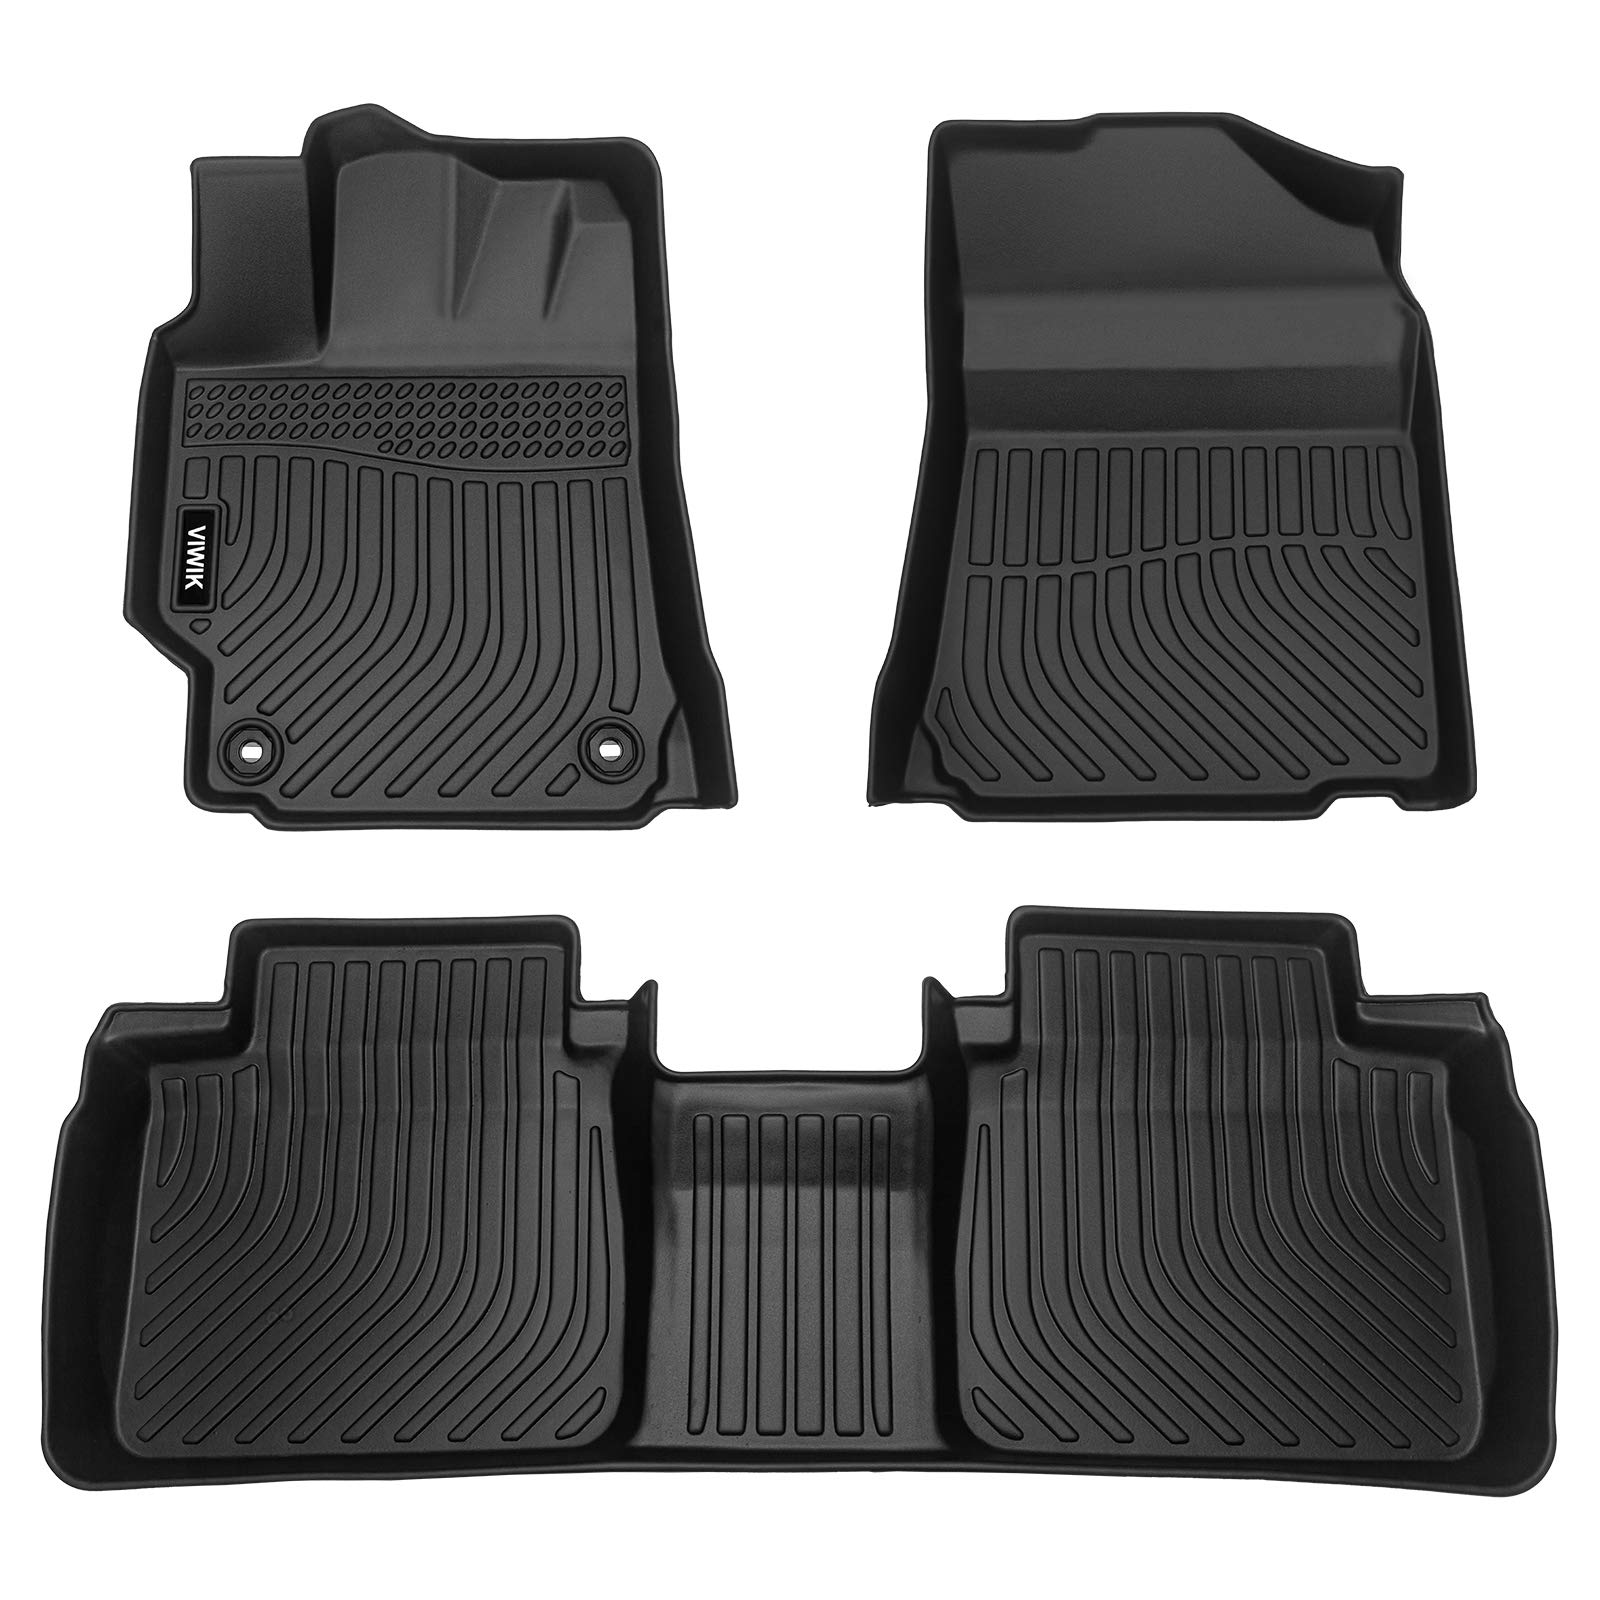 VIWIK Floor Mats for Toyota Camry 2012-2017